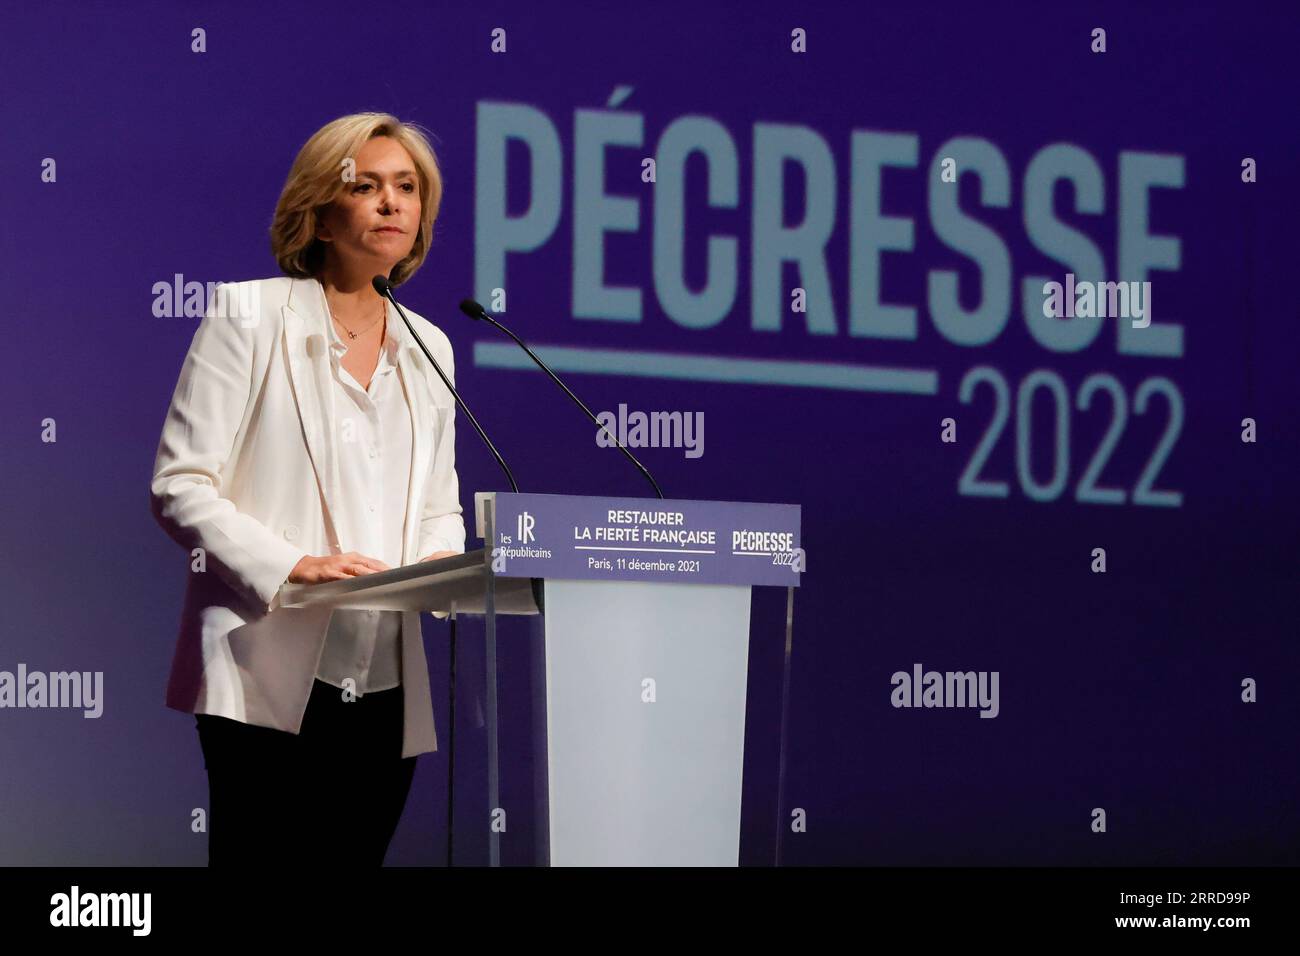 211212 -- PARIS, Dec. 12, 2021 -- Valerie Pecresse addresses a meeting following a closed-door session with party officials in Paris, France, Dec. 11, 2021. Valerie Pecresse, President of France s Ile-de-France region, will represent the Les Republicains party in the presidential elections scheduled for April 2022. Photo by /Xinhua FRANCE-PARIS-LR-VALERIE PECRESSE RitxHeise PUBLICATIONxNOTxINxCHN Stock Photo